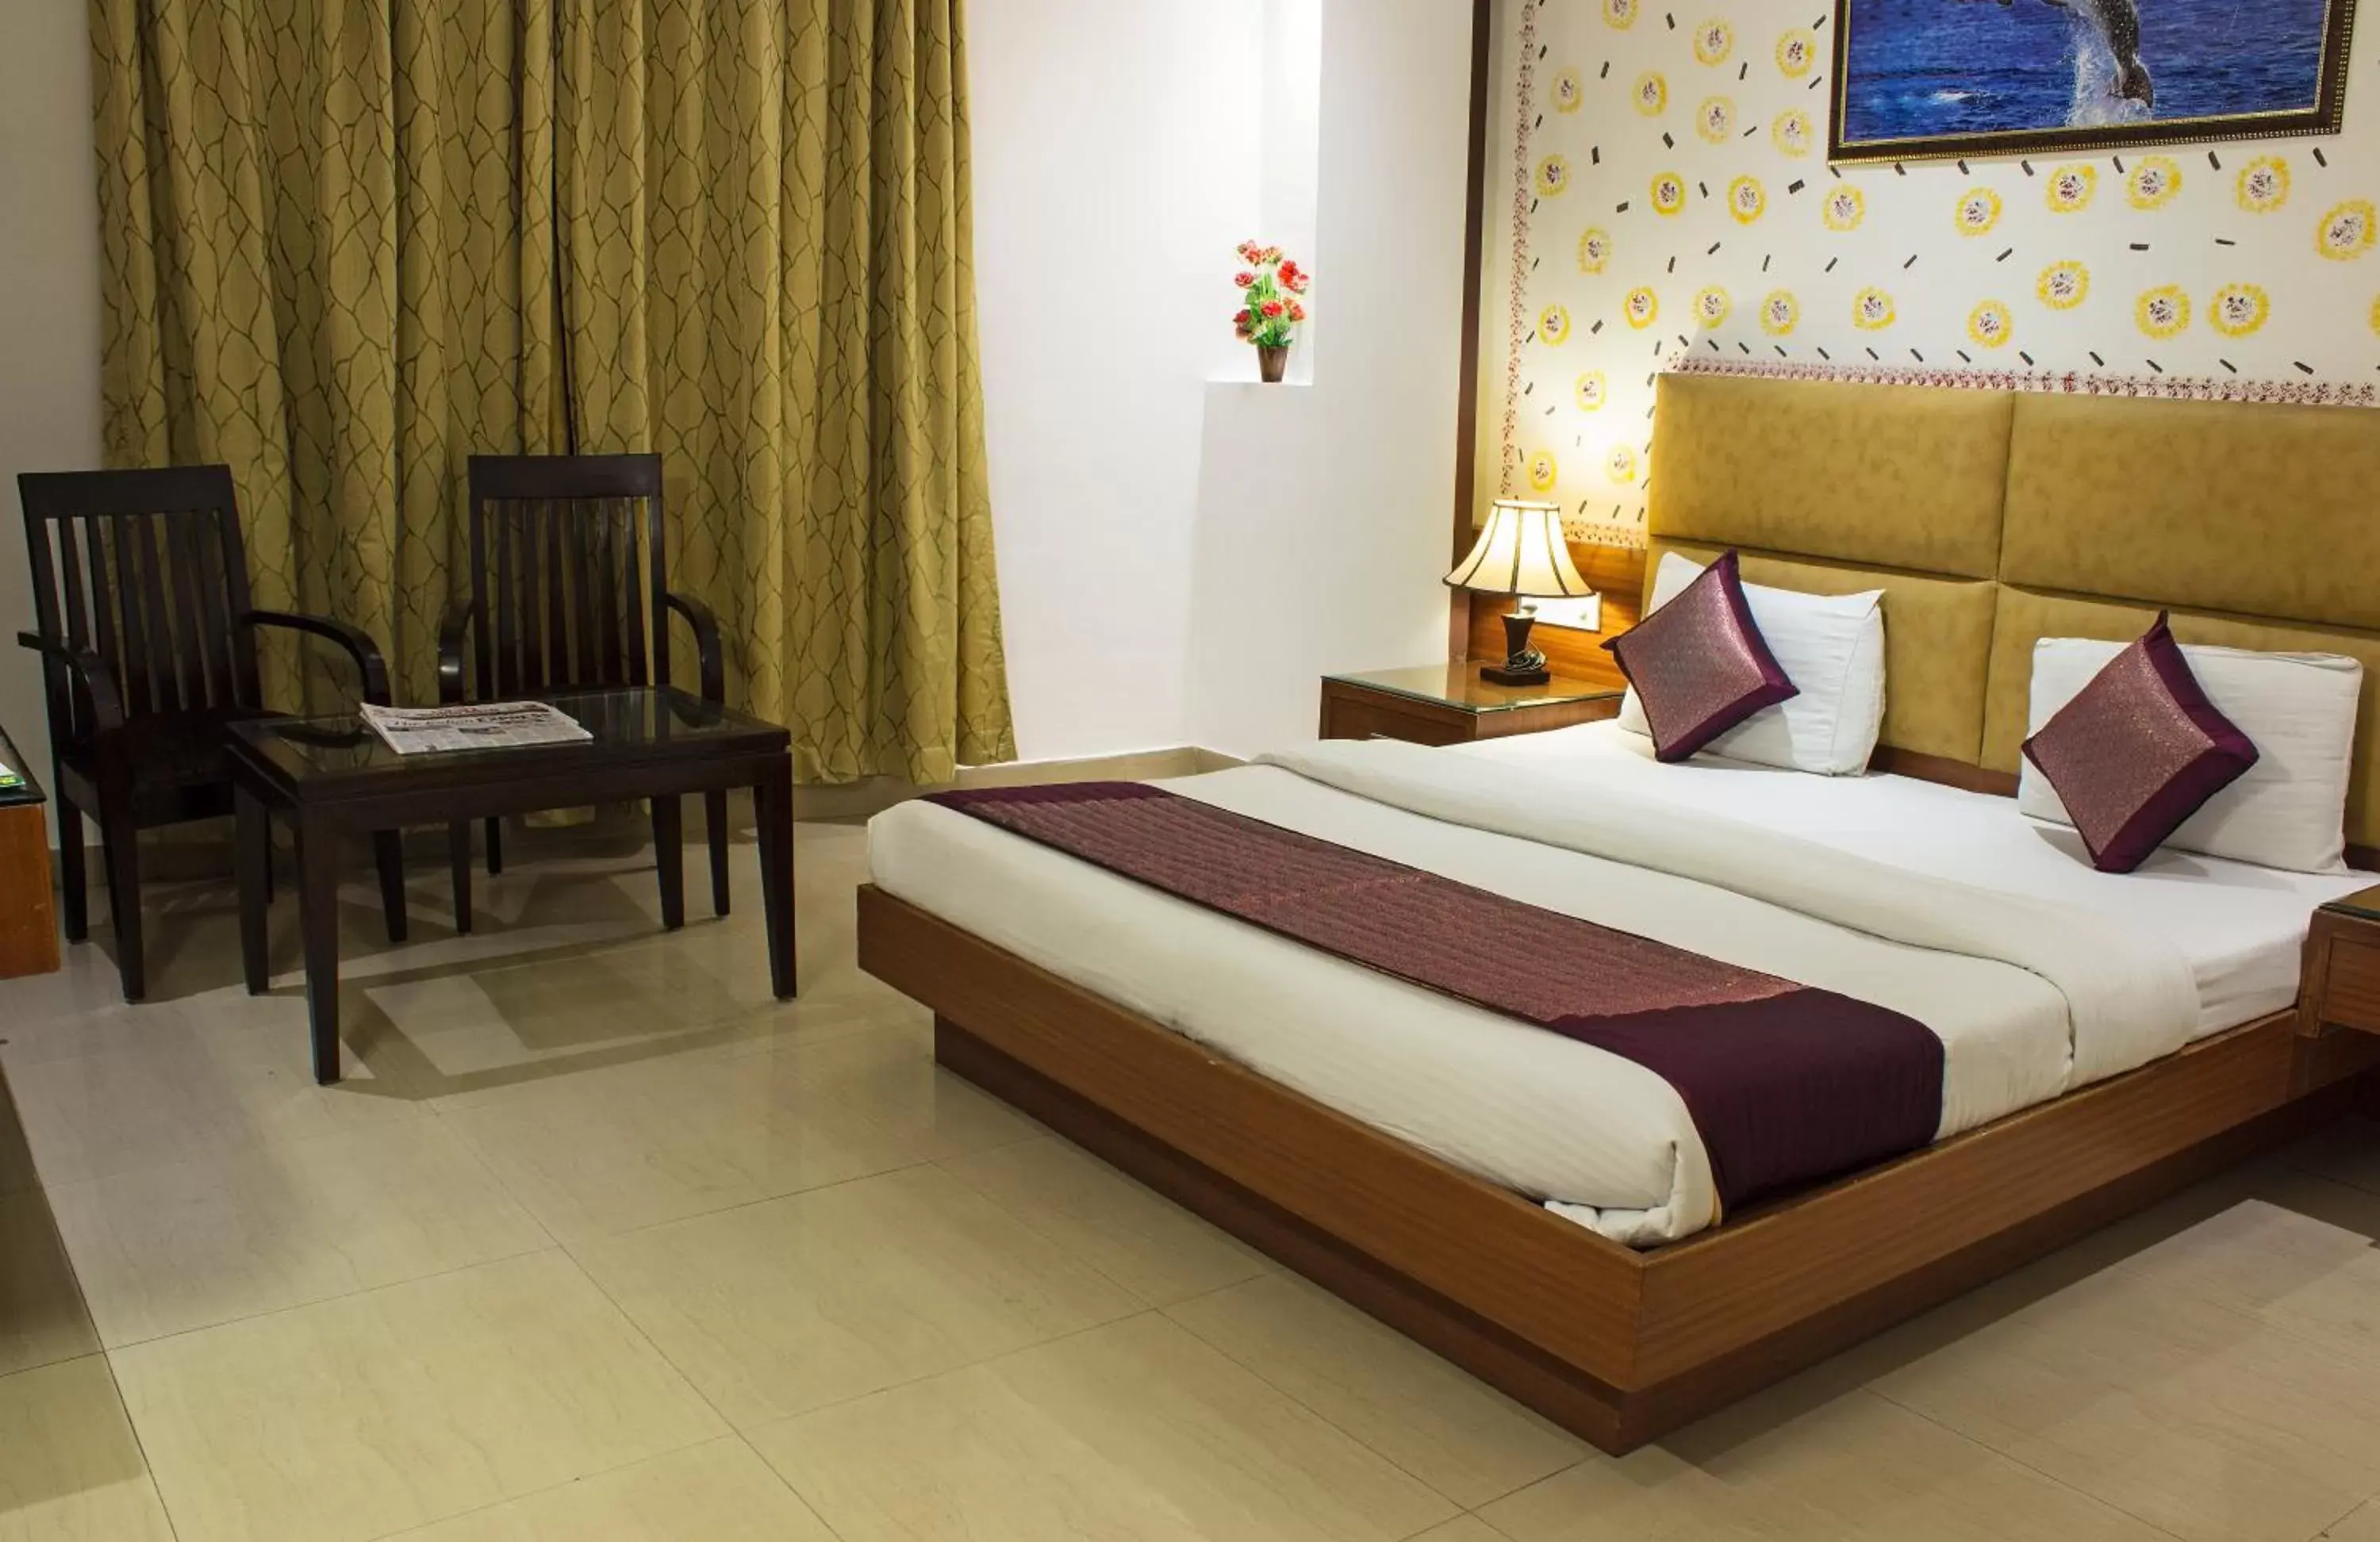 Bed, Room Photo in Hotel Krishna - By RCG Hotels